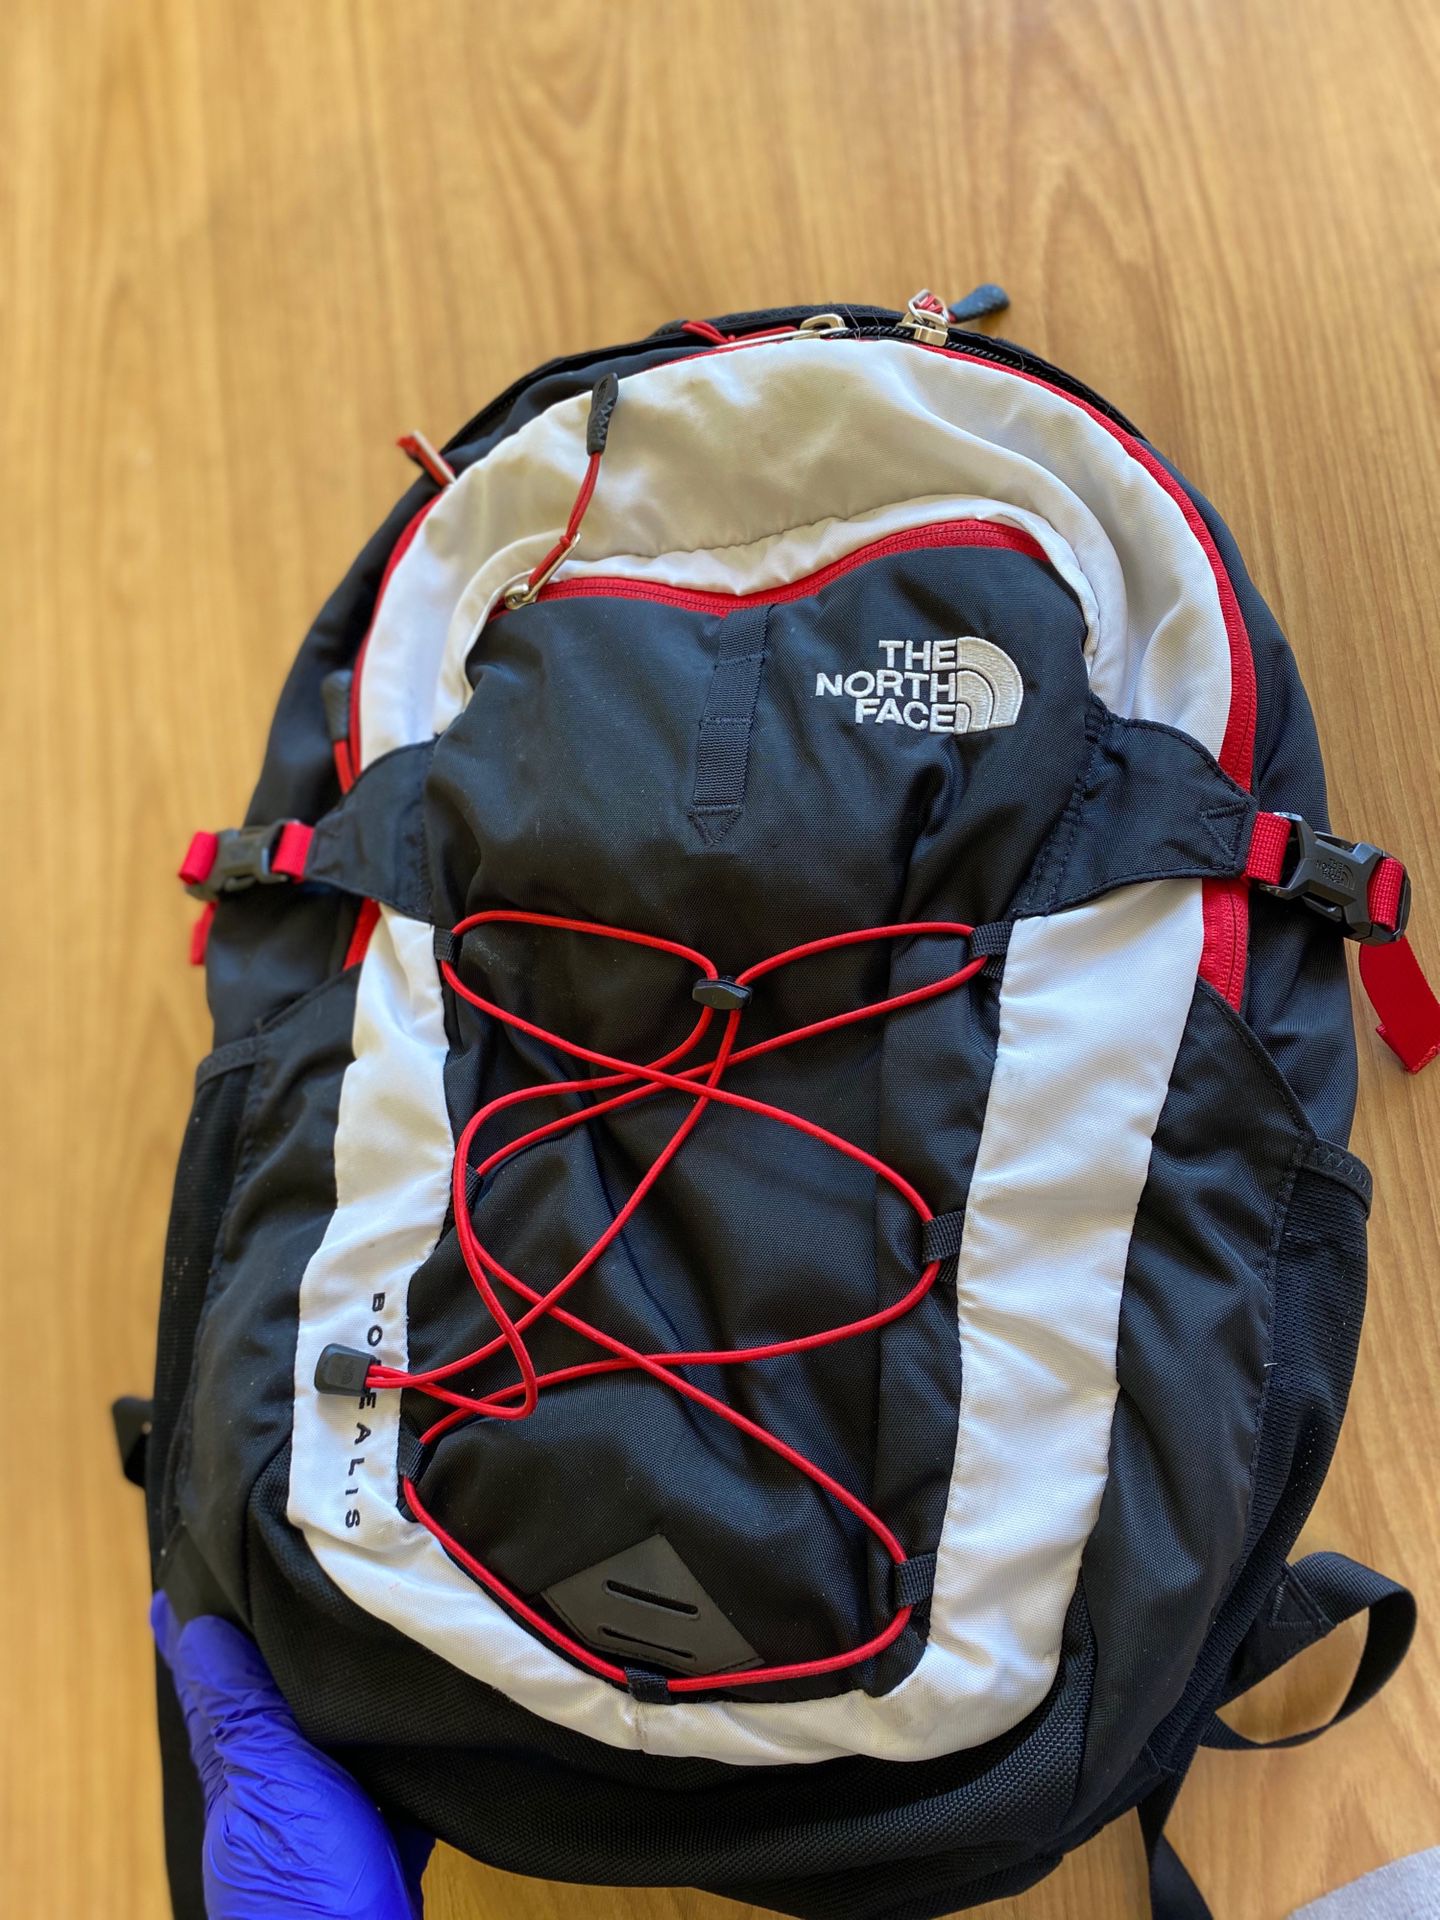 The north face limited edition backpack